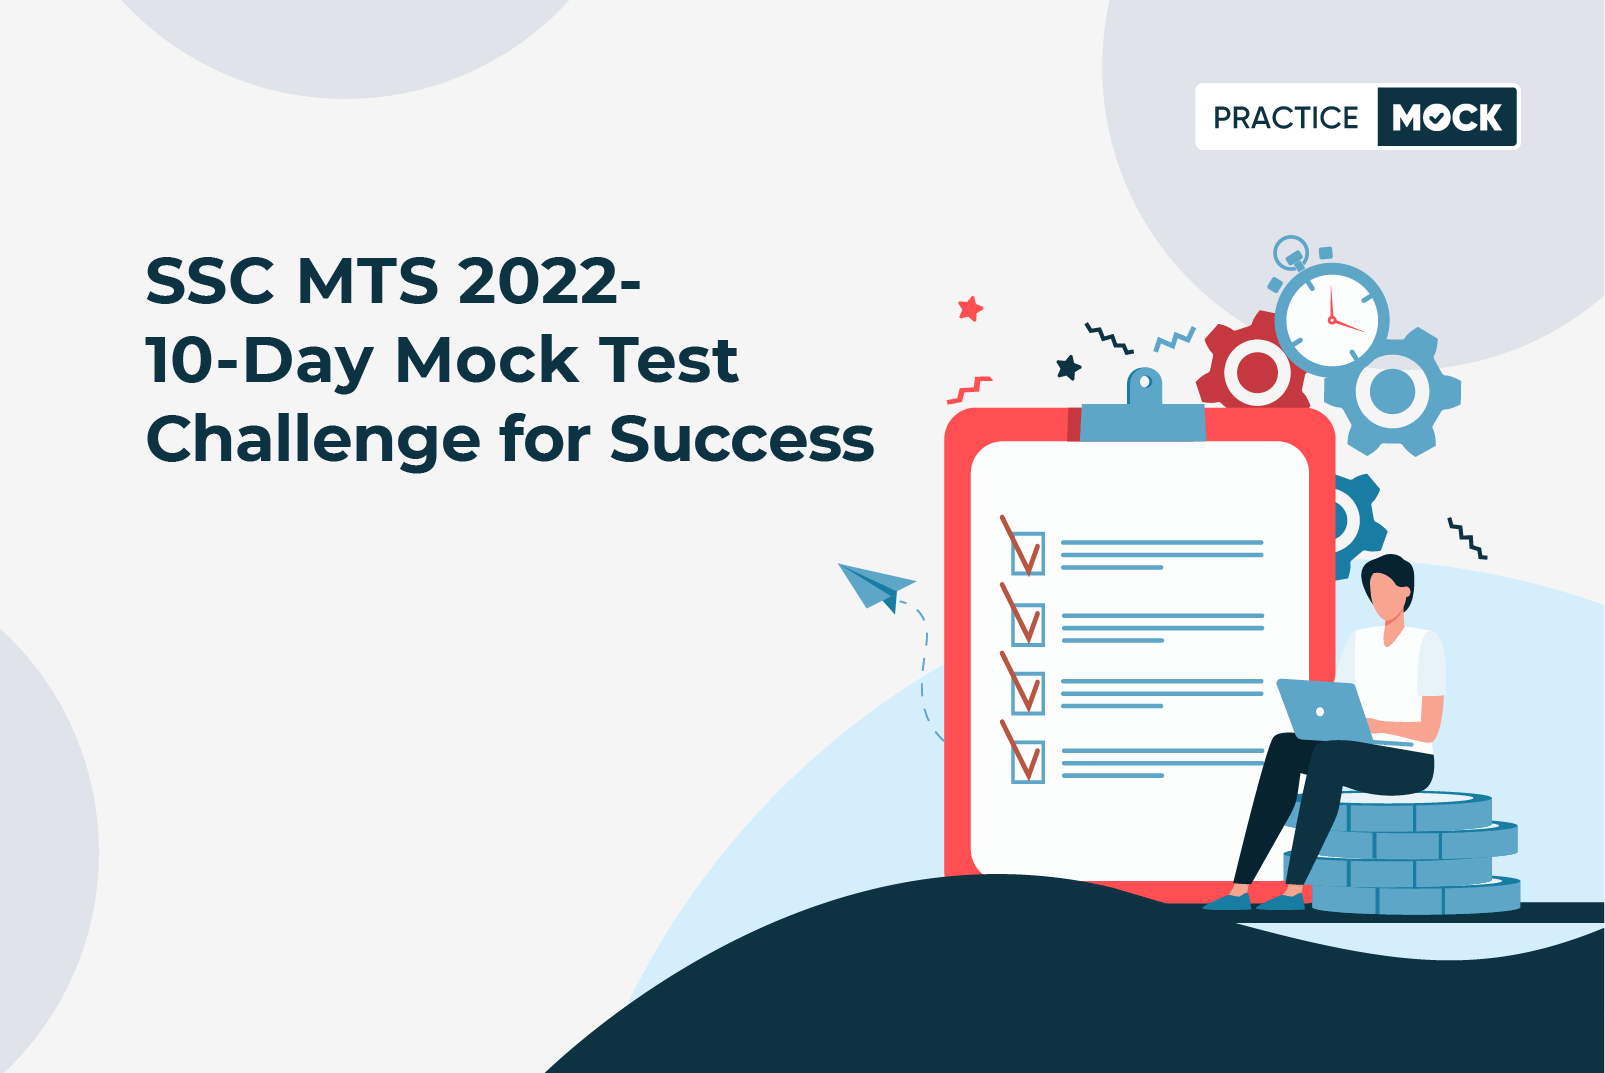 SSC MTS Tier 1 2022-10-Day Mock Test Challenge for Success